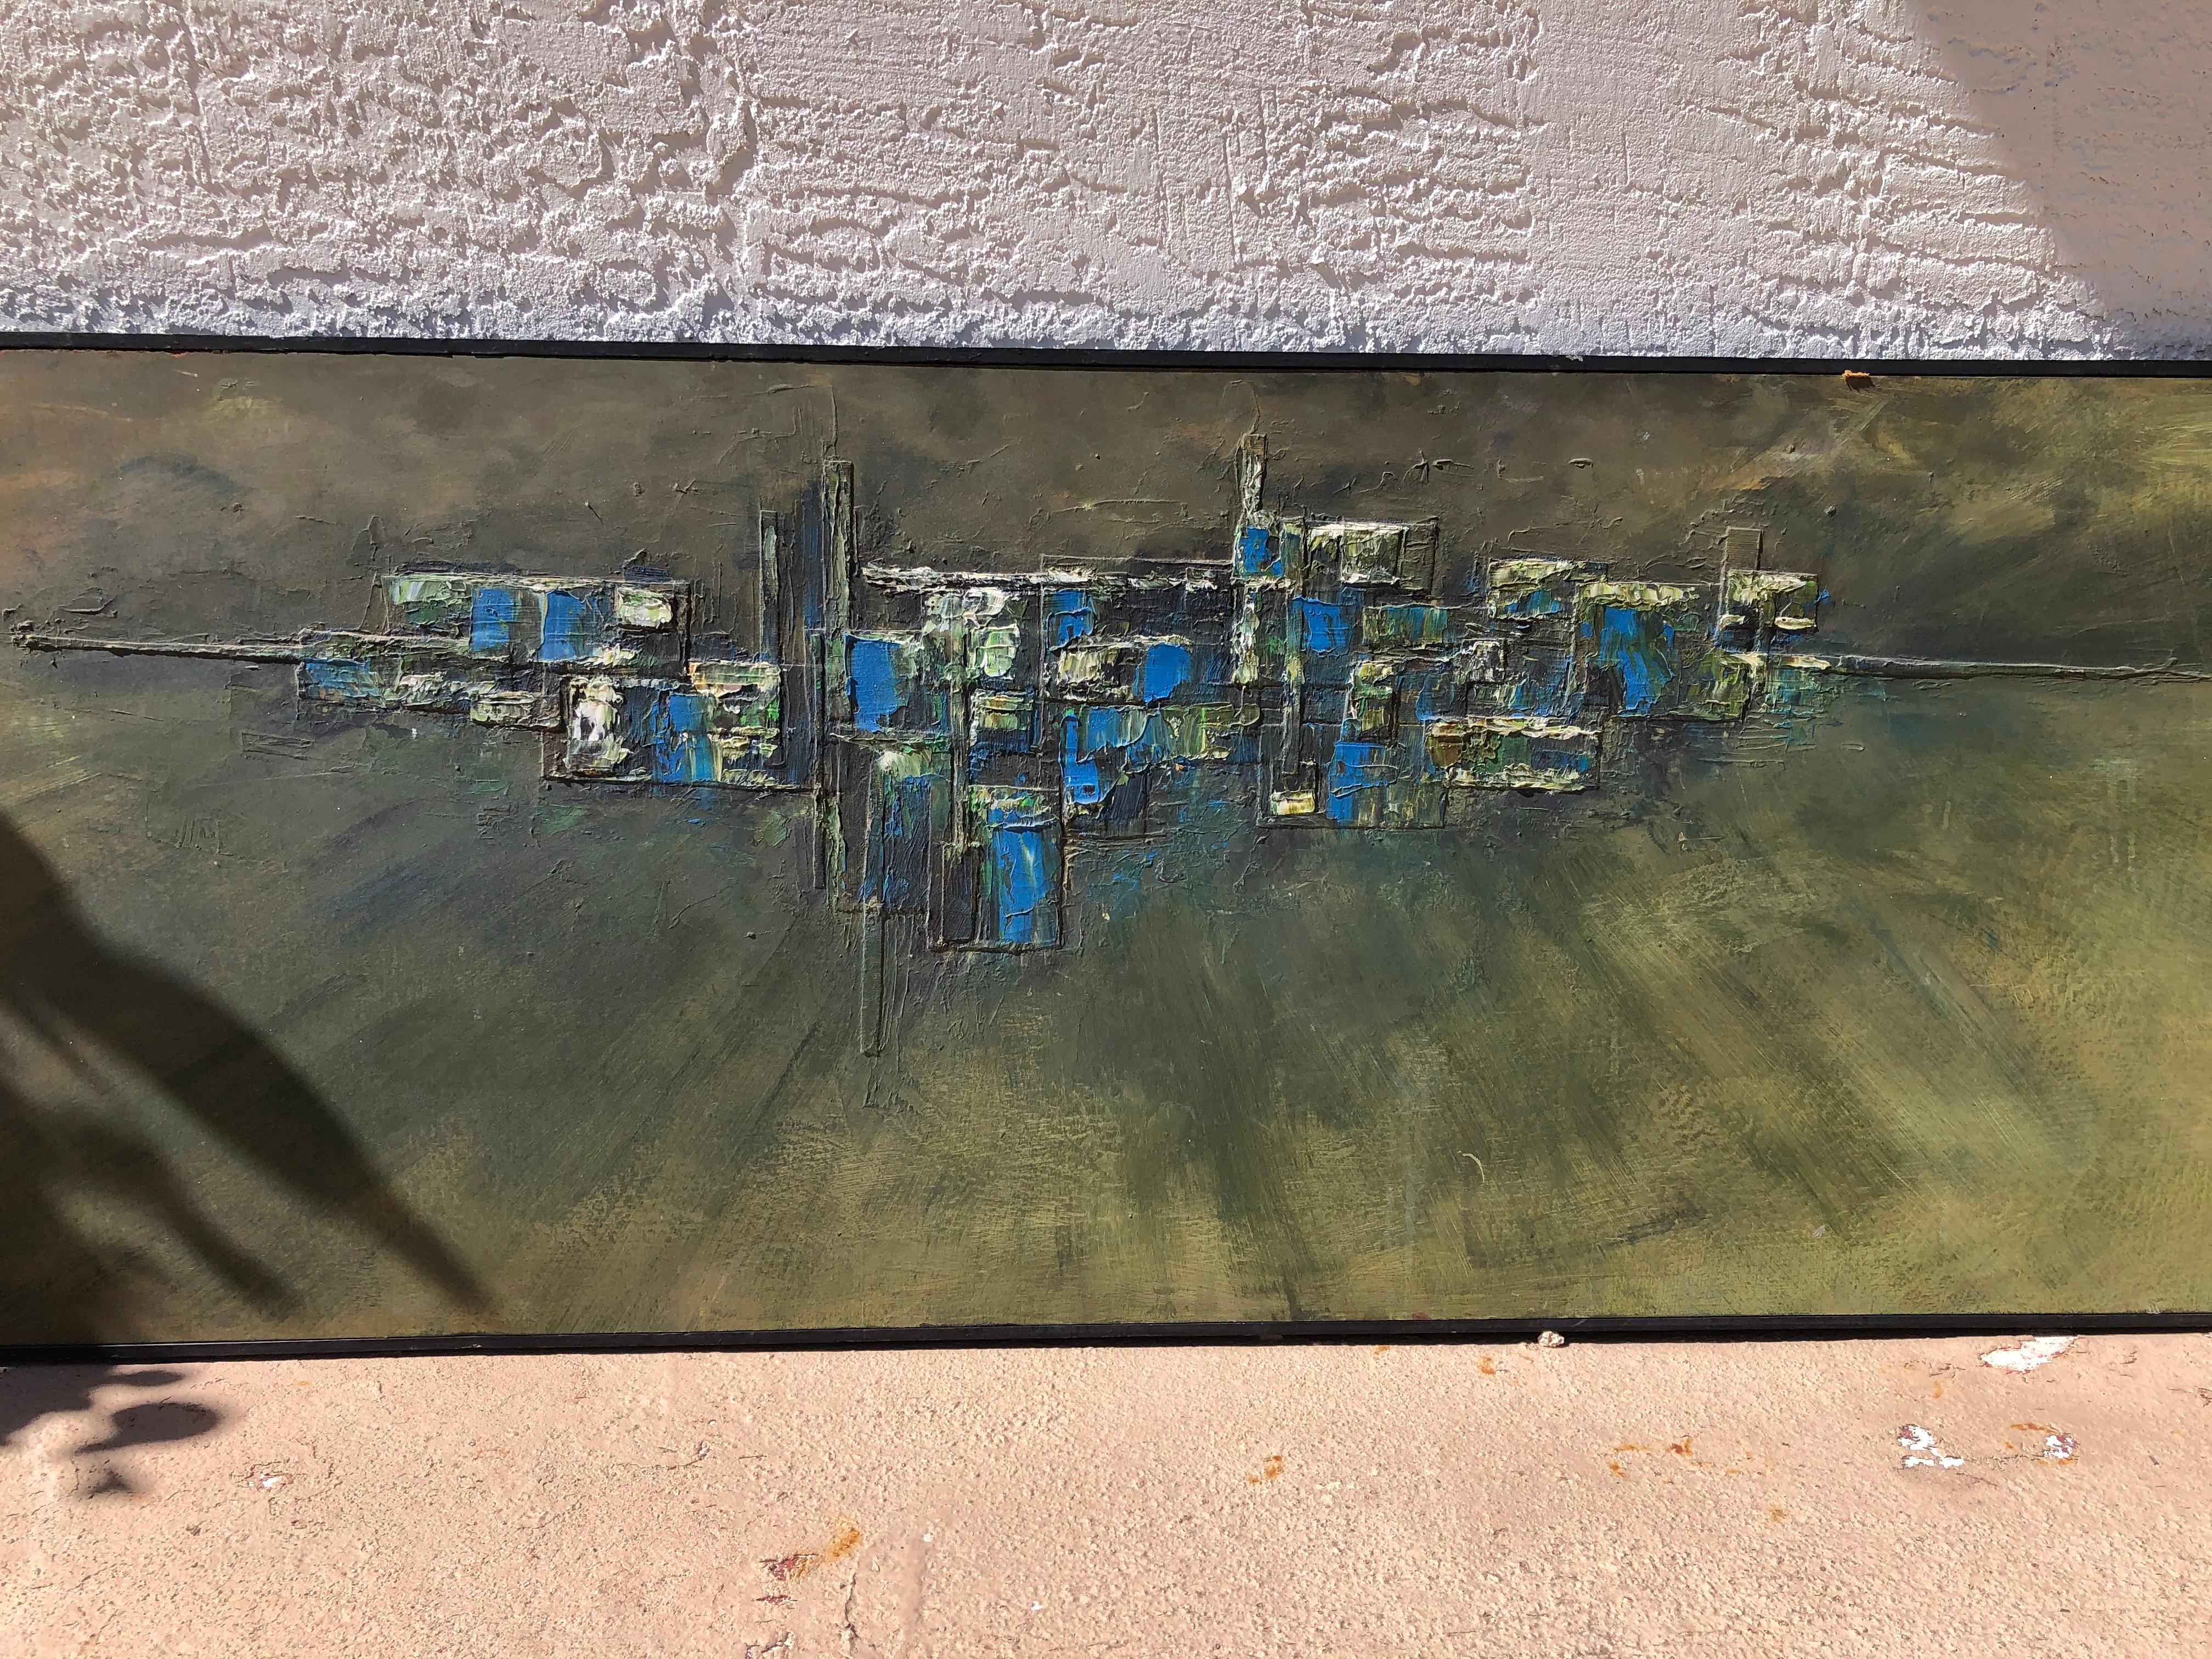 Fabulous mystery midcentury abstract. It is oil on board measuring 60 inches wide by 20 high. Frame is 1/2 around. Painting is signed Kirstein. The artist was obviously very talented, it has an almost brutalist feel to it.